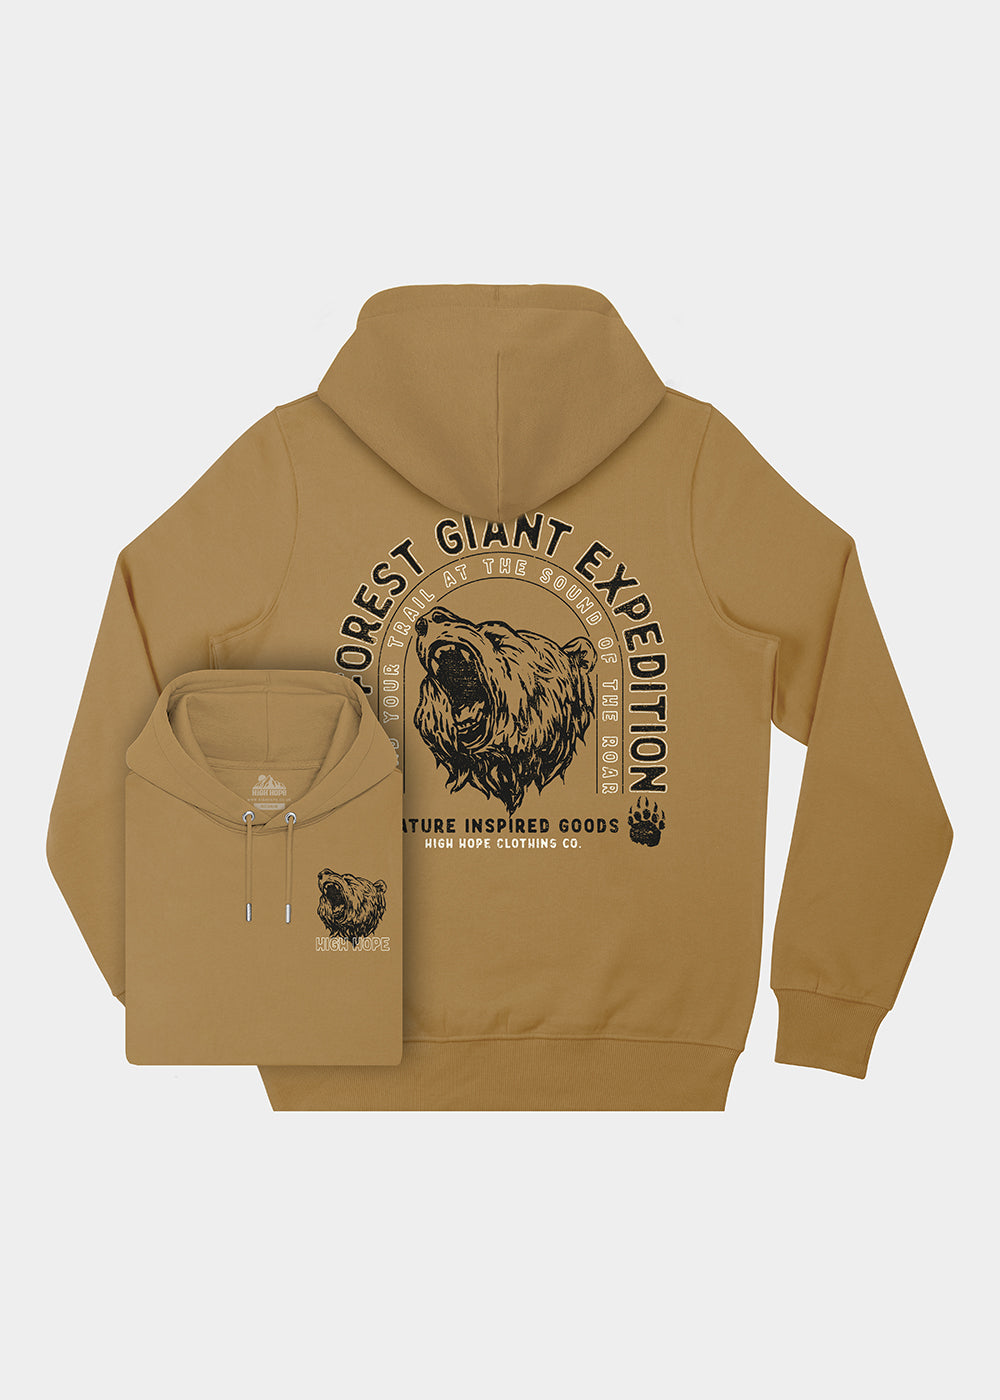 Forest Giant Hoodie / Back Print